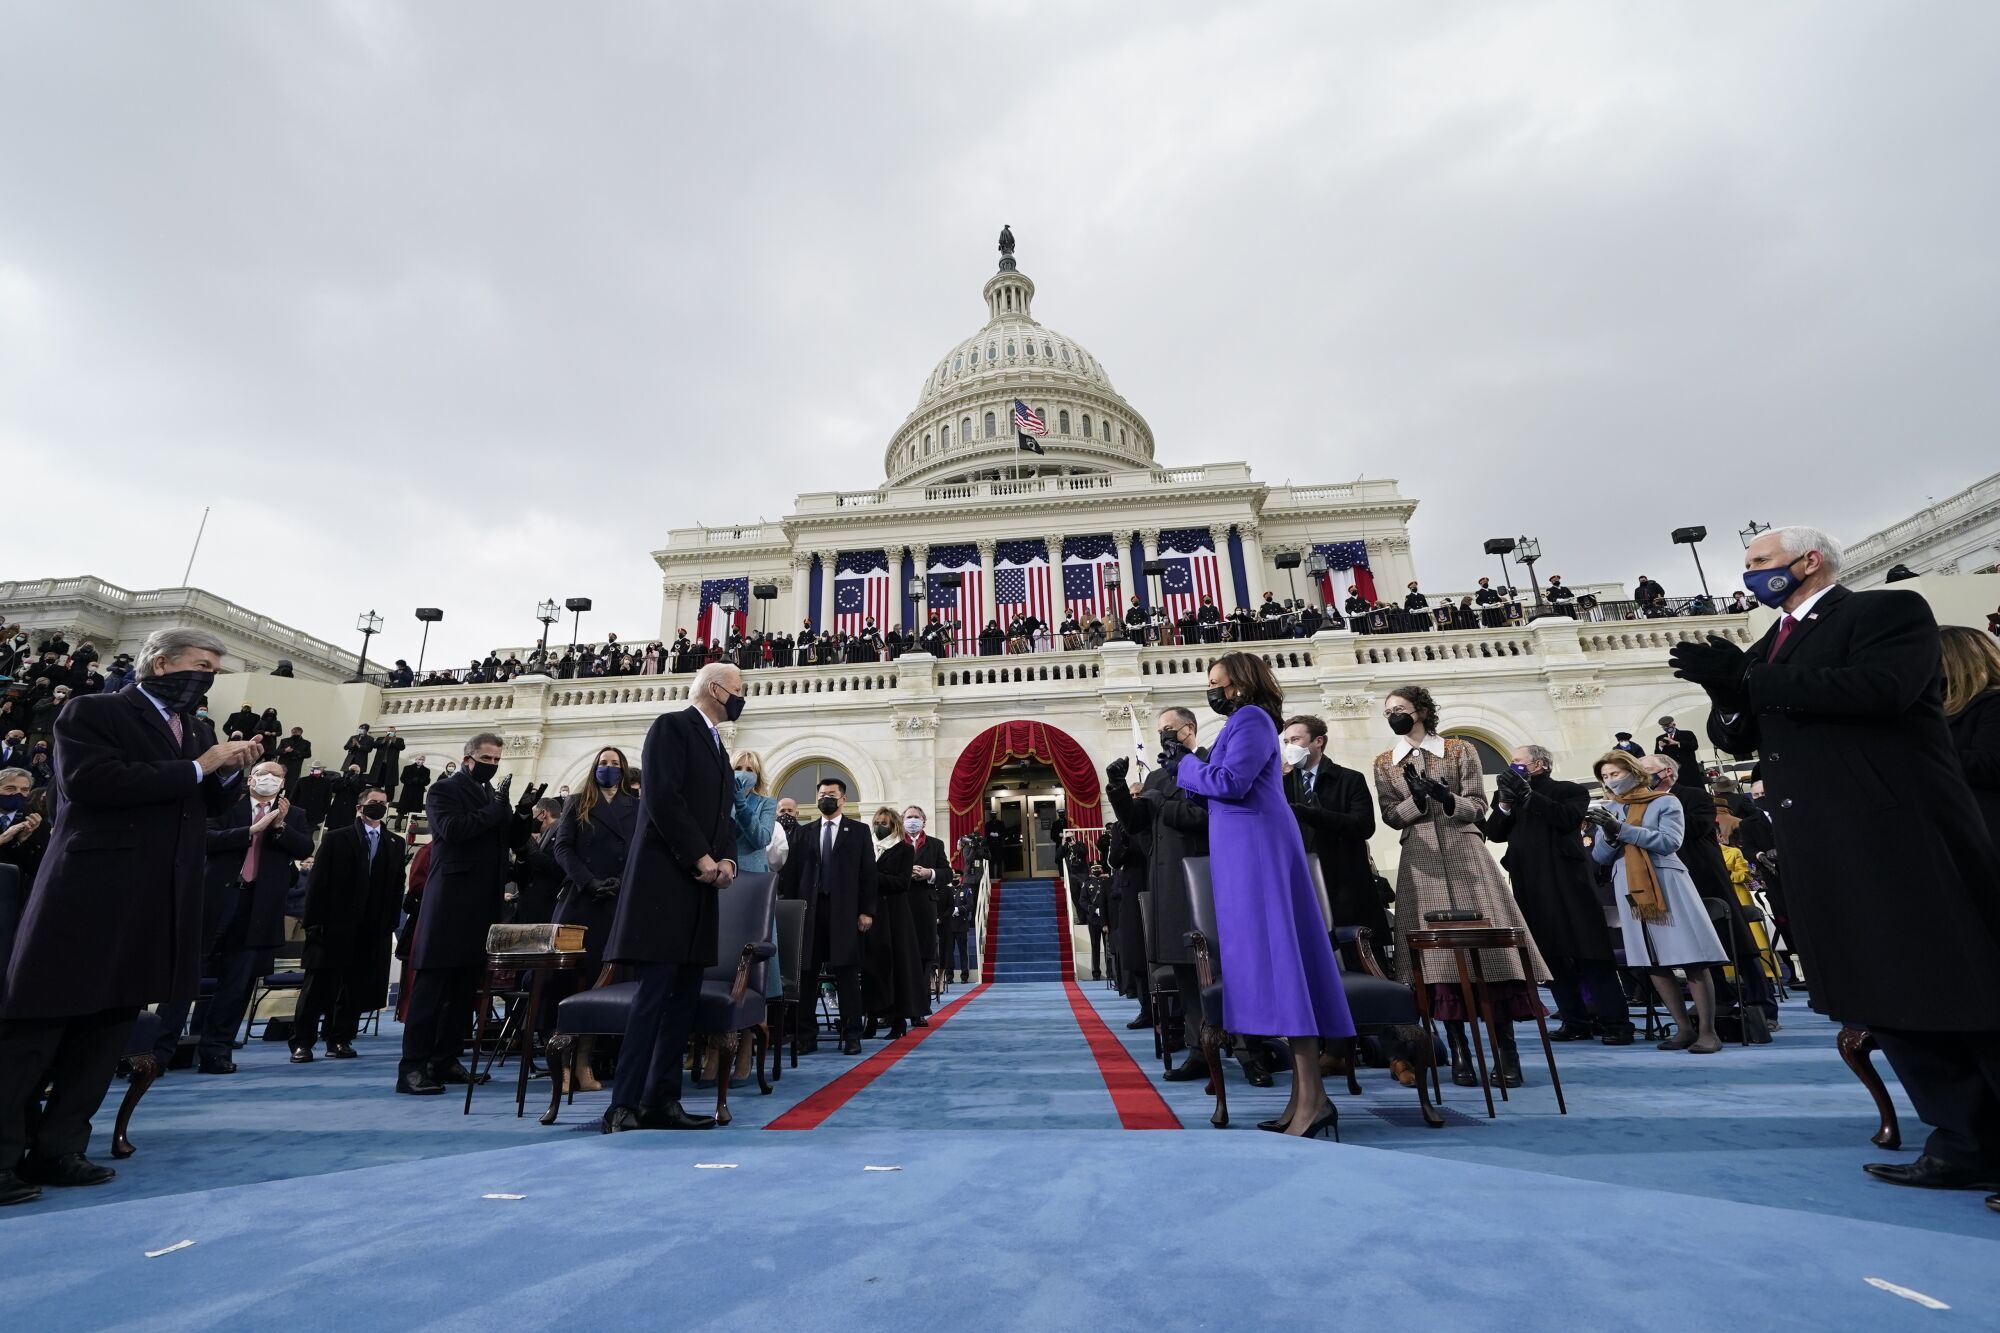 Kamala Harris applauds as Joe Biden arrives for his inauguration with people and the U.S. Capitol in the background.